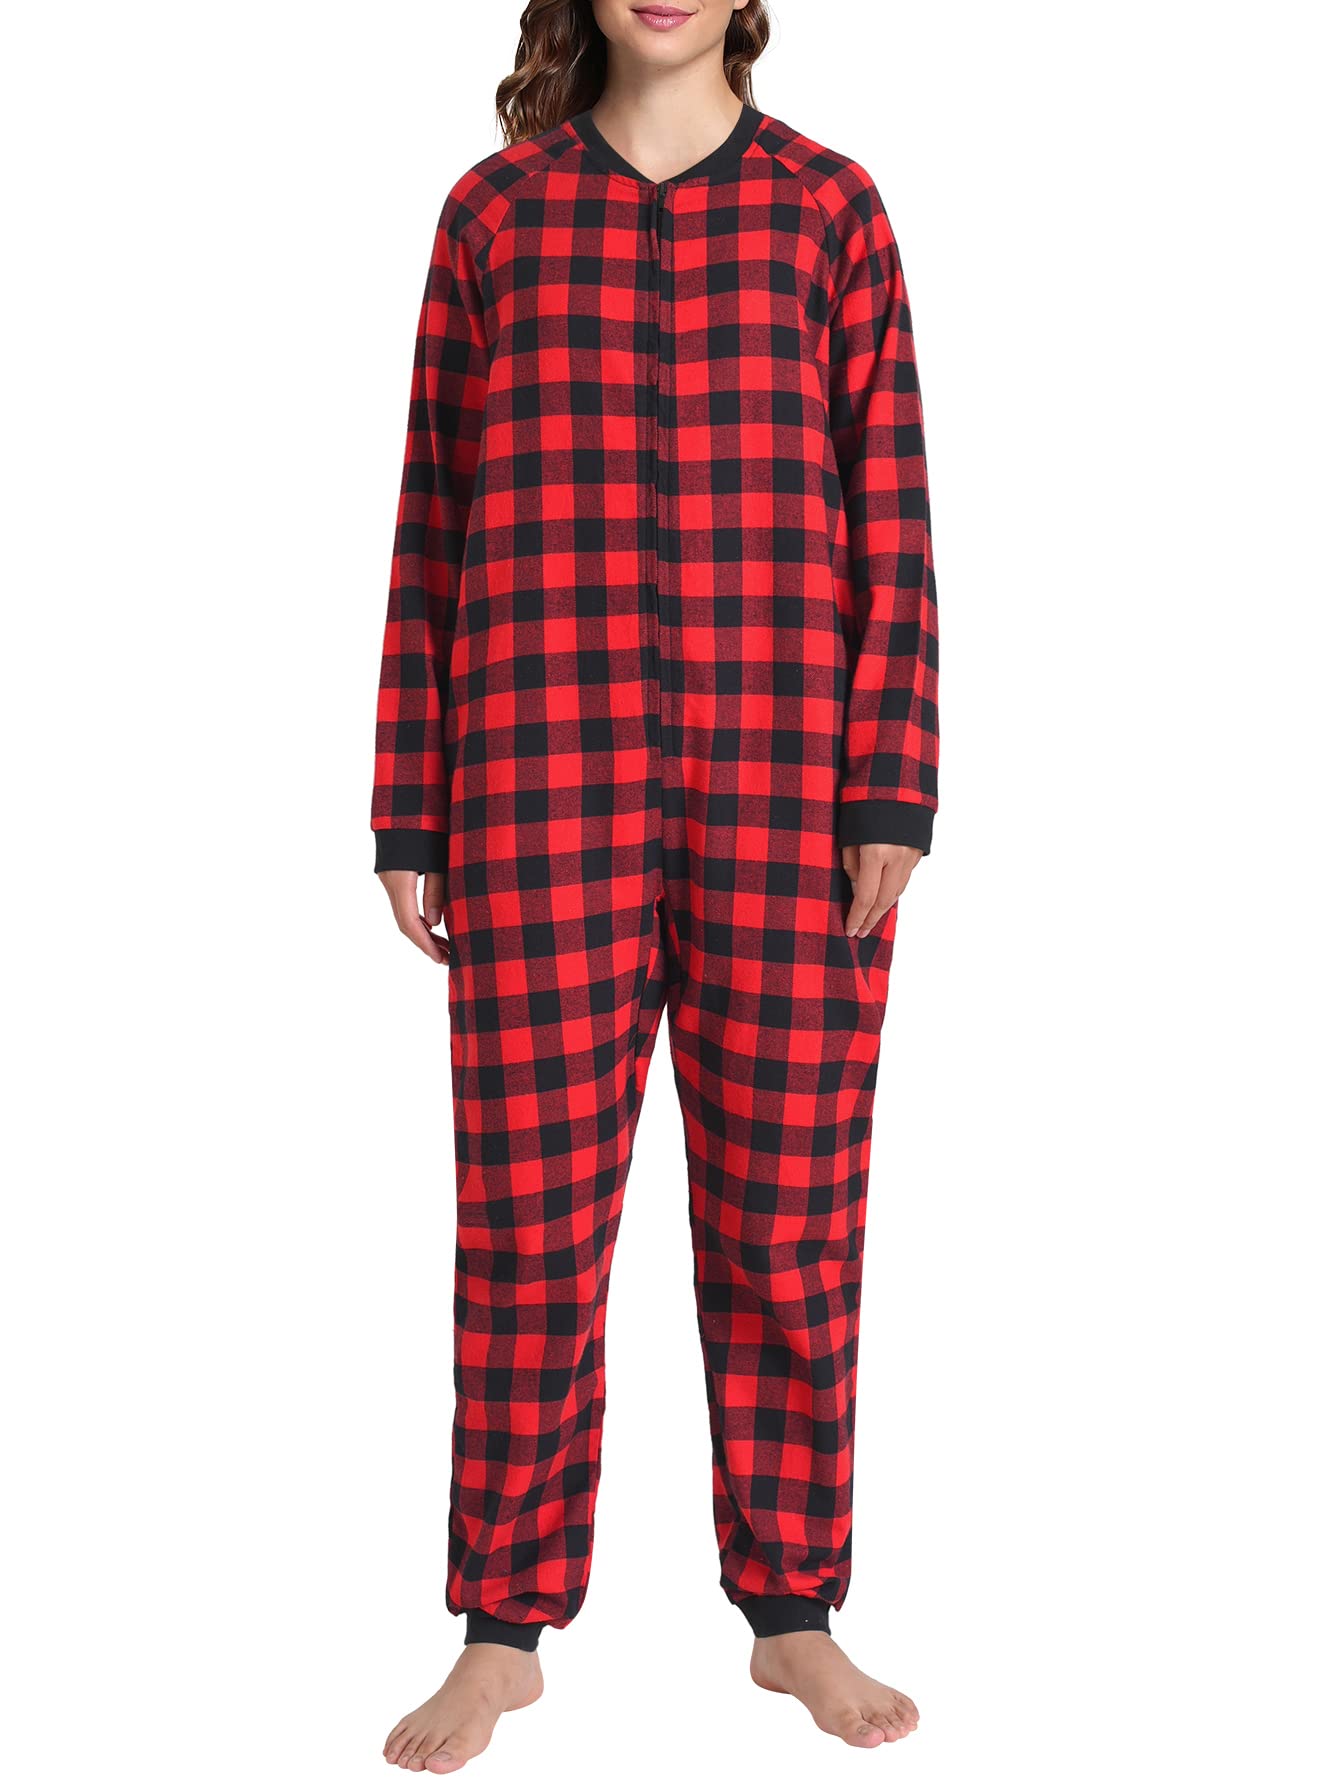 Women's Pajamas - Footed, Flannel and more for Women